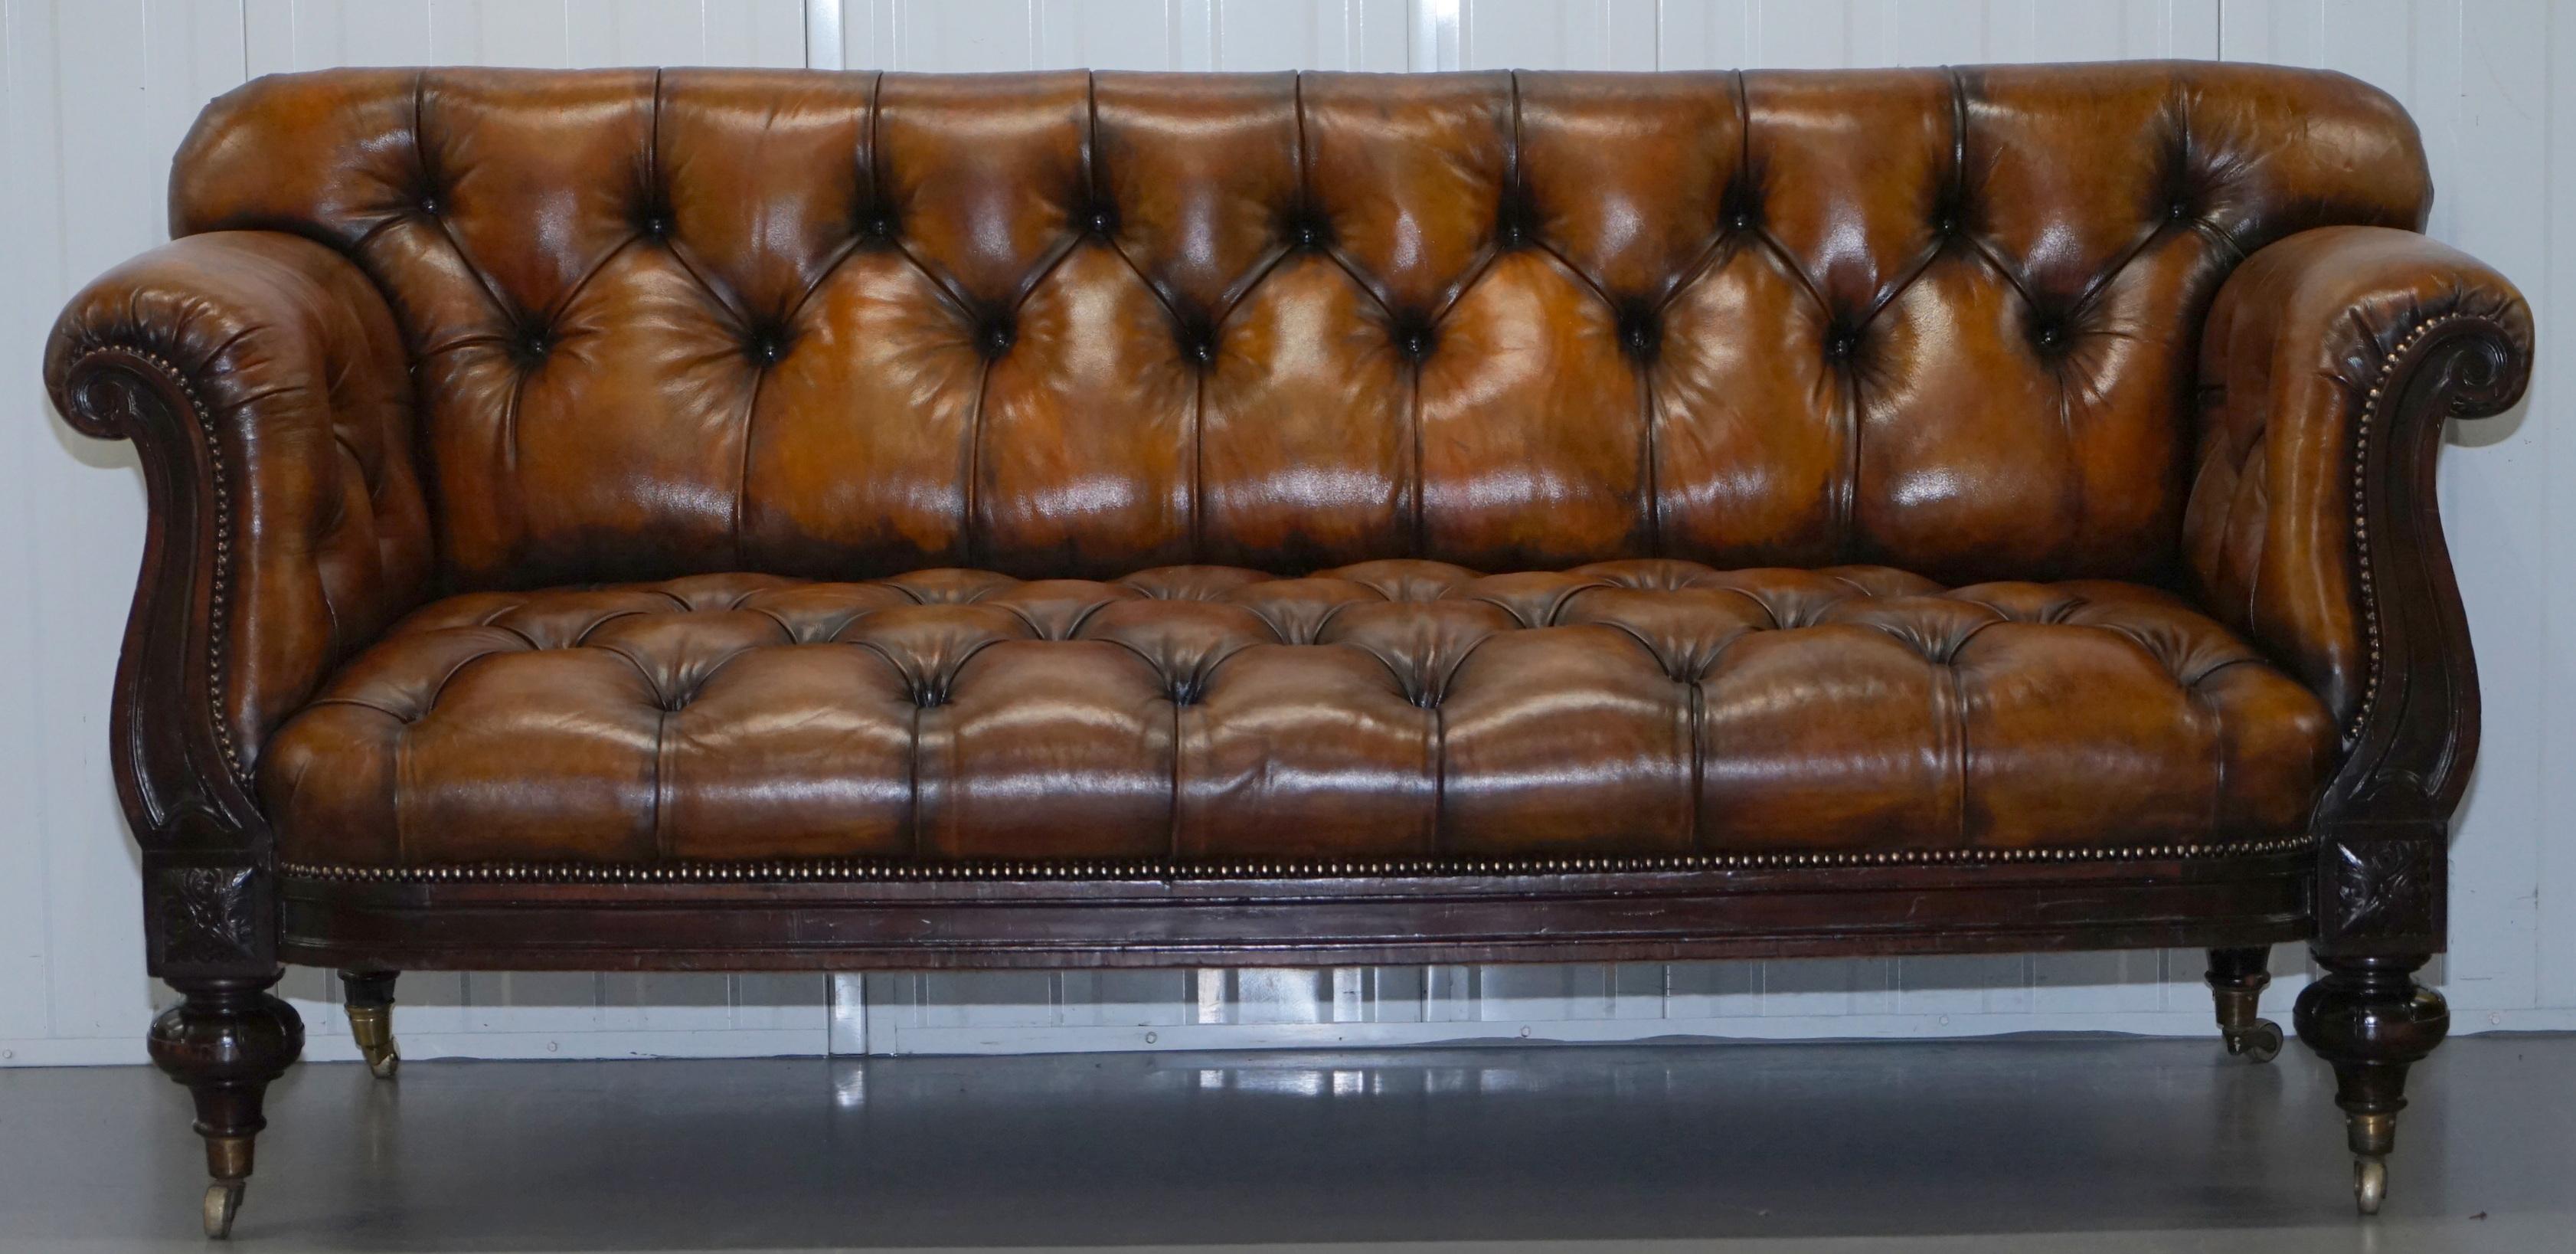 We are delighted to offer for sale this very rare fully restored Chesterfield Victorian show frame sofa in rosewood with hand dyed brown leather

This sofa has been on a journey, it came to me with horrifically worn leather upholstery which was